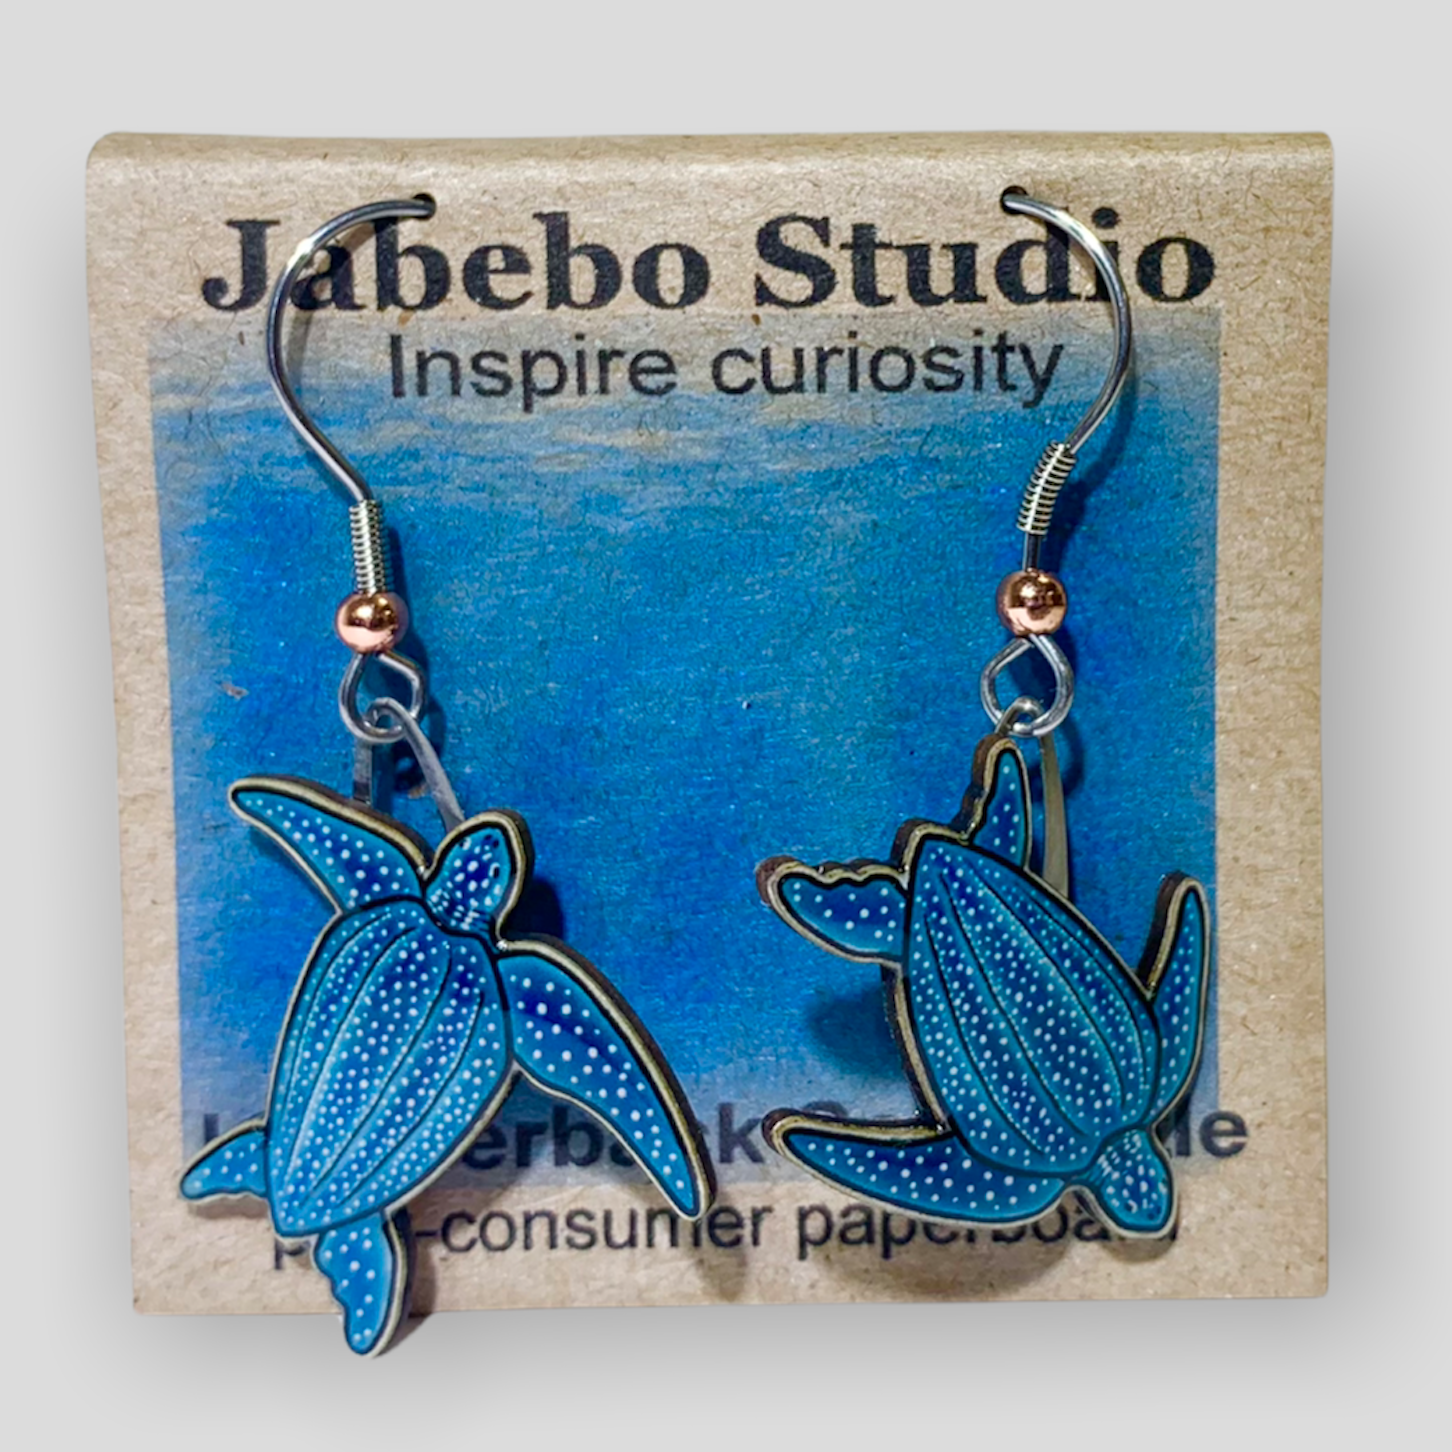 Picture shown is of 1 inch tall pair of earrings of the marine animal the Leatherback Sea Turtle.